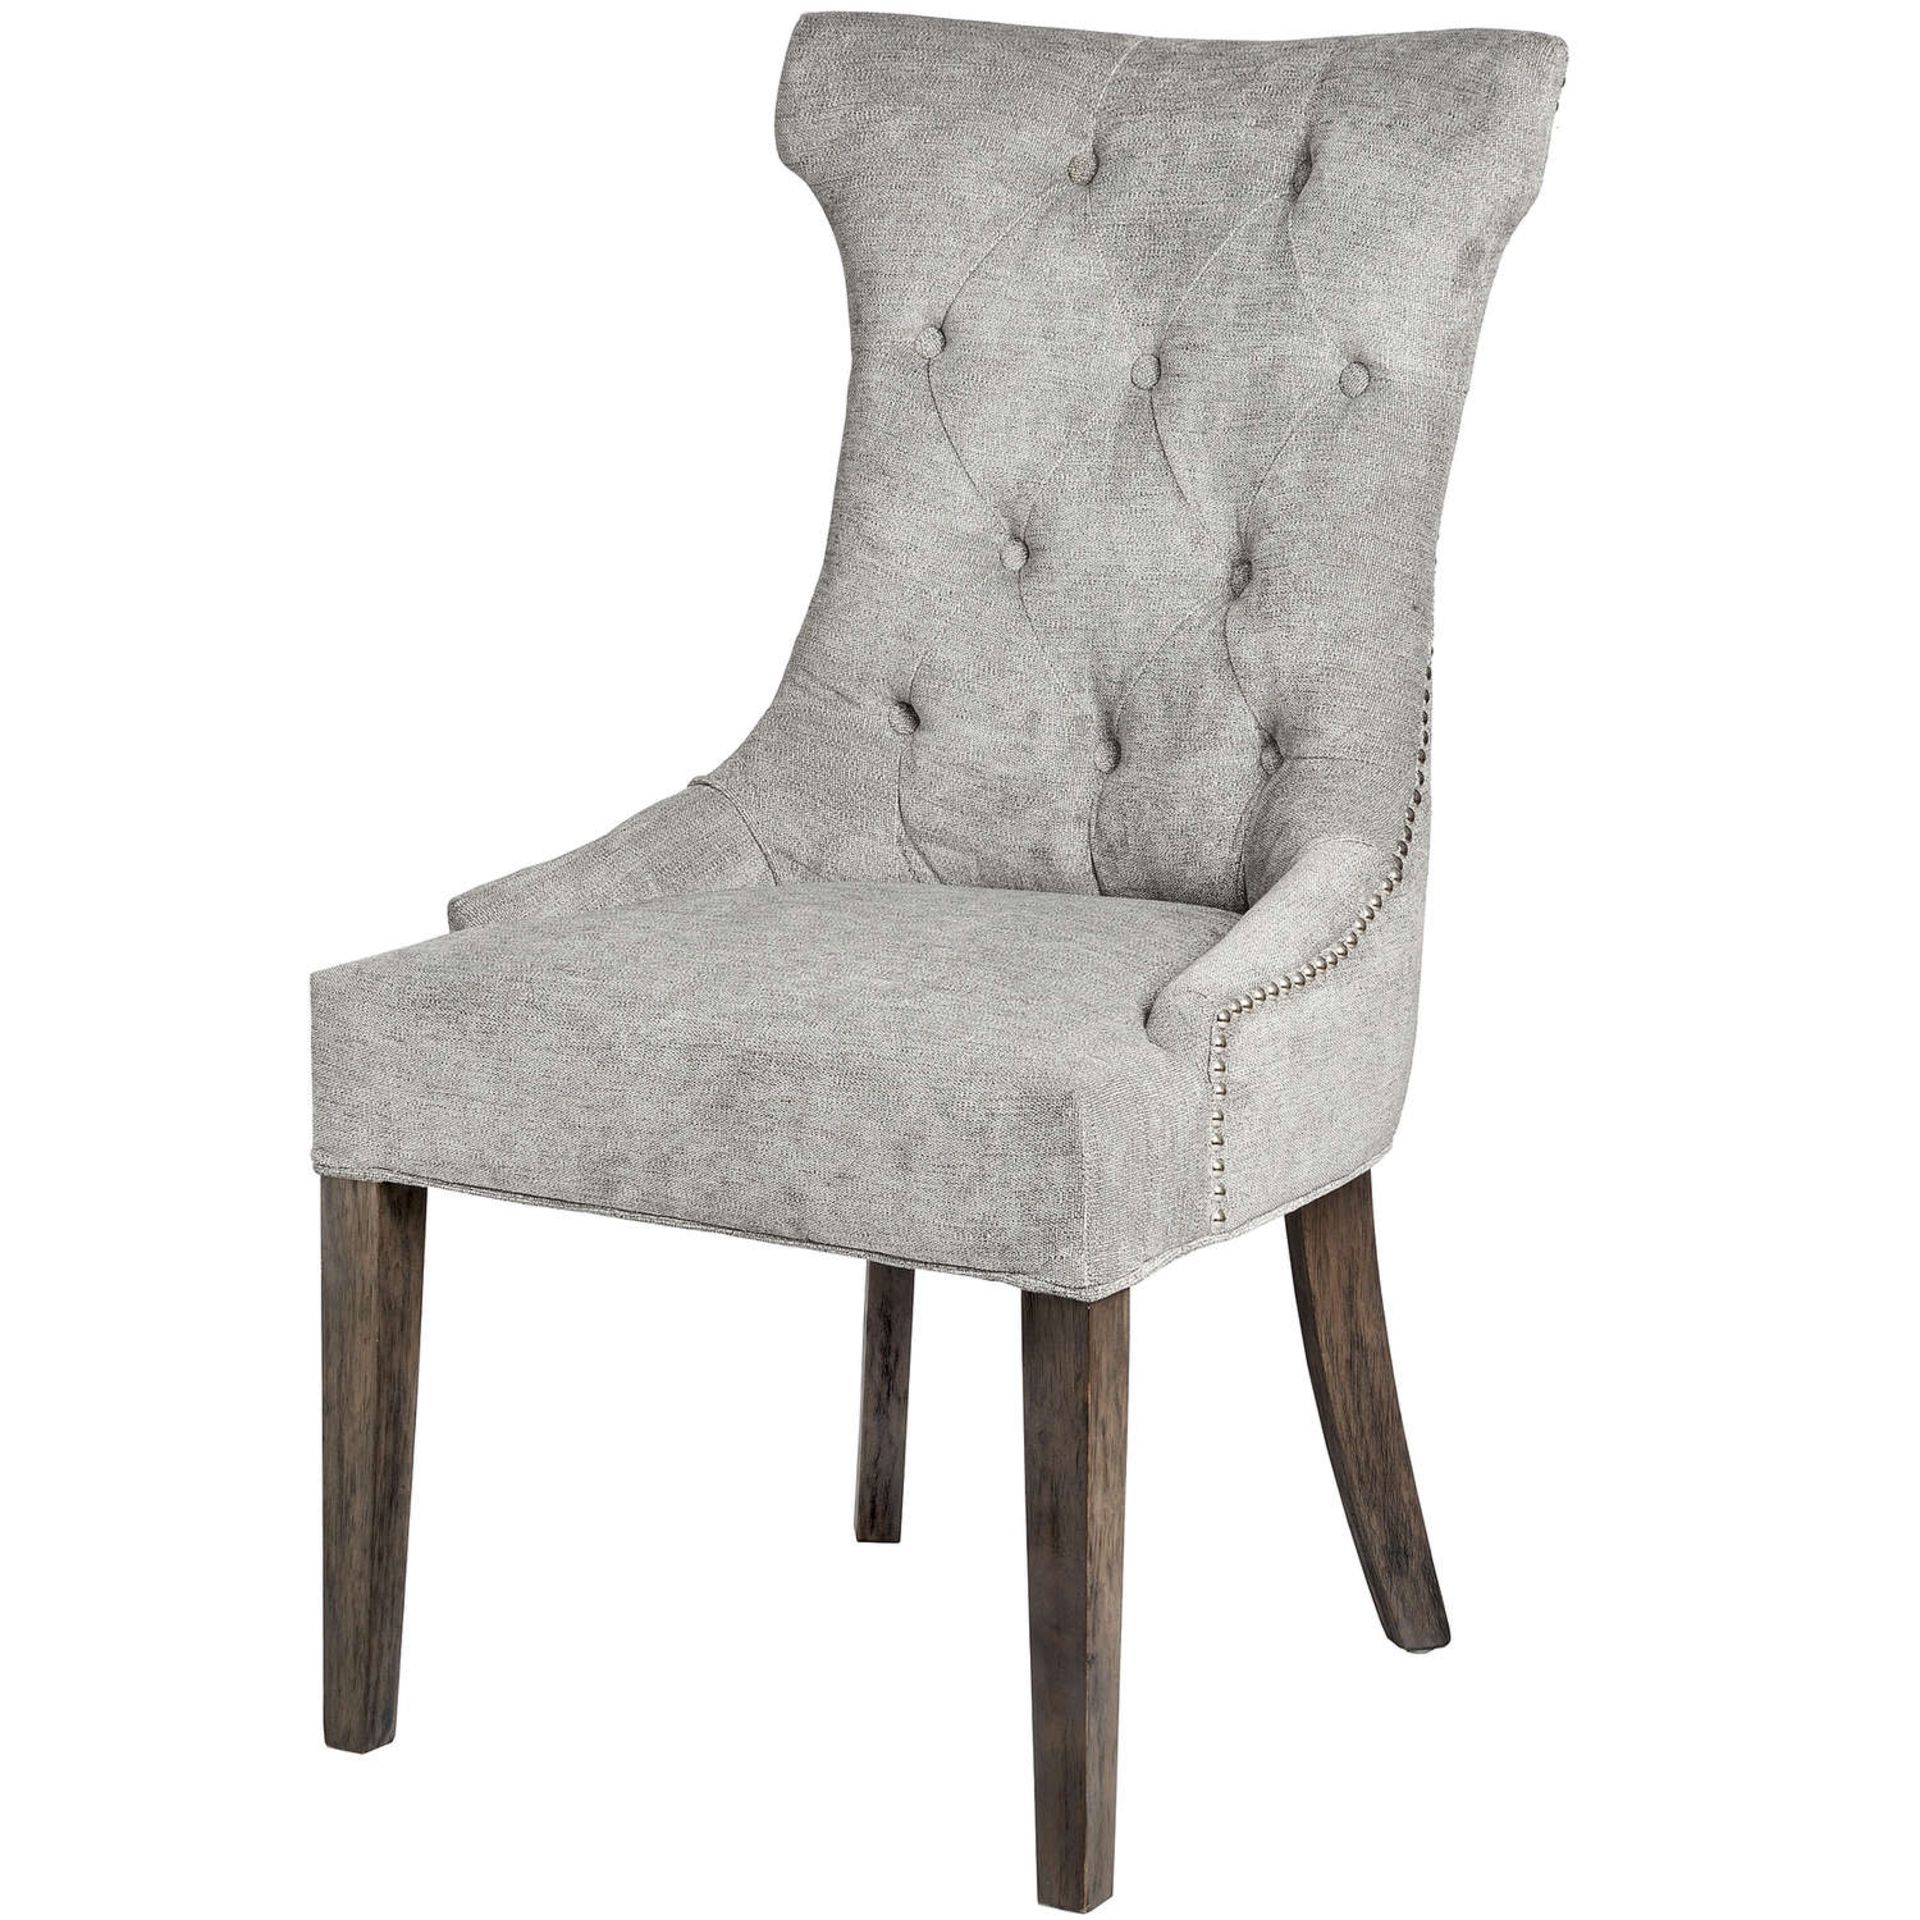 High Wing Dining Chair With Ring Pull This Is A Luxurious Dining Chair Designed With Flowing